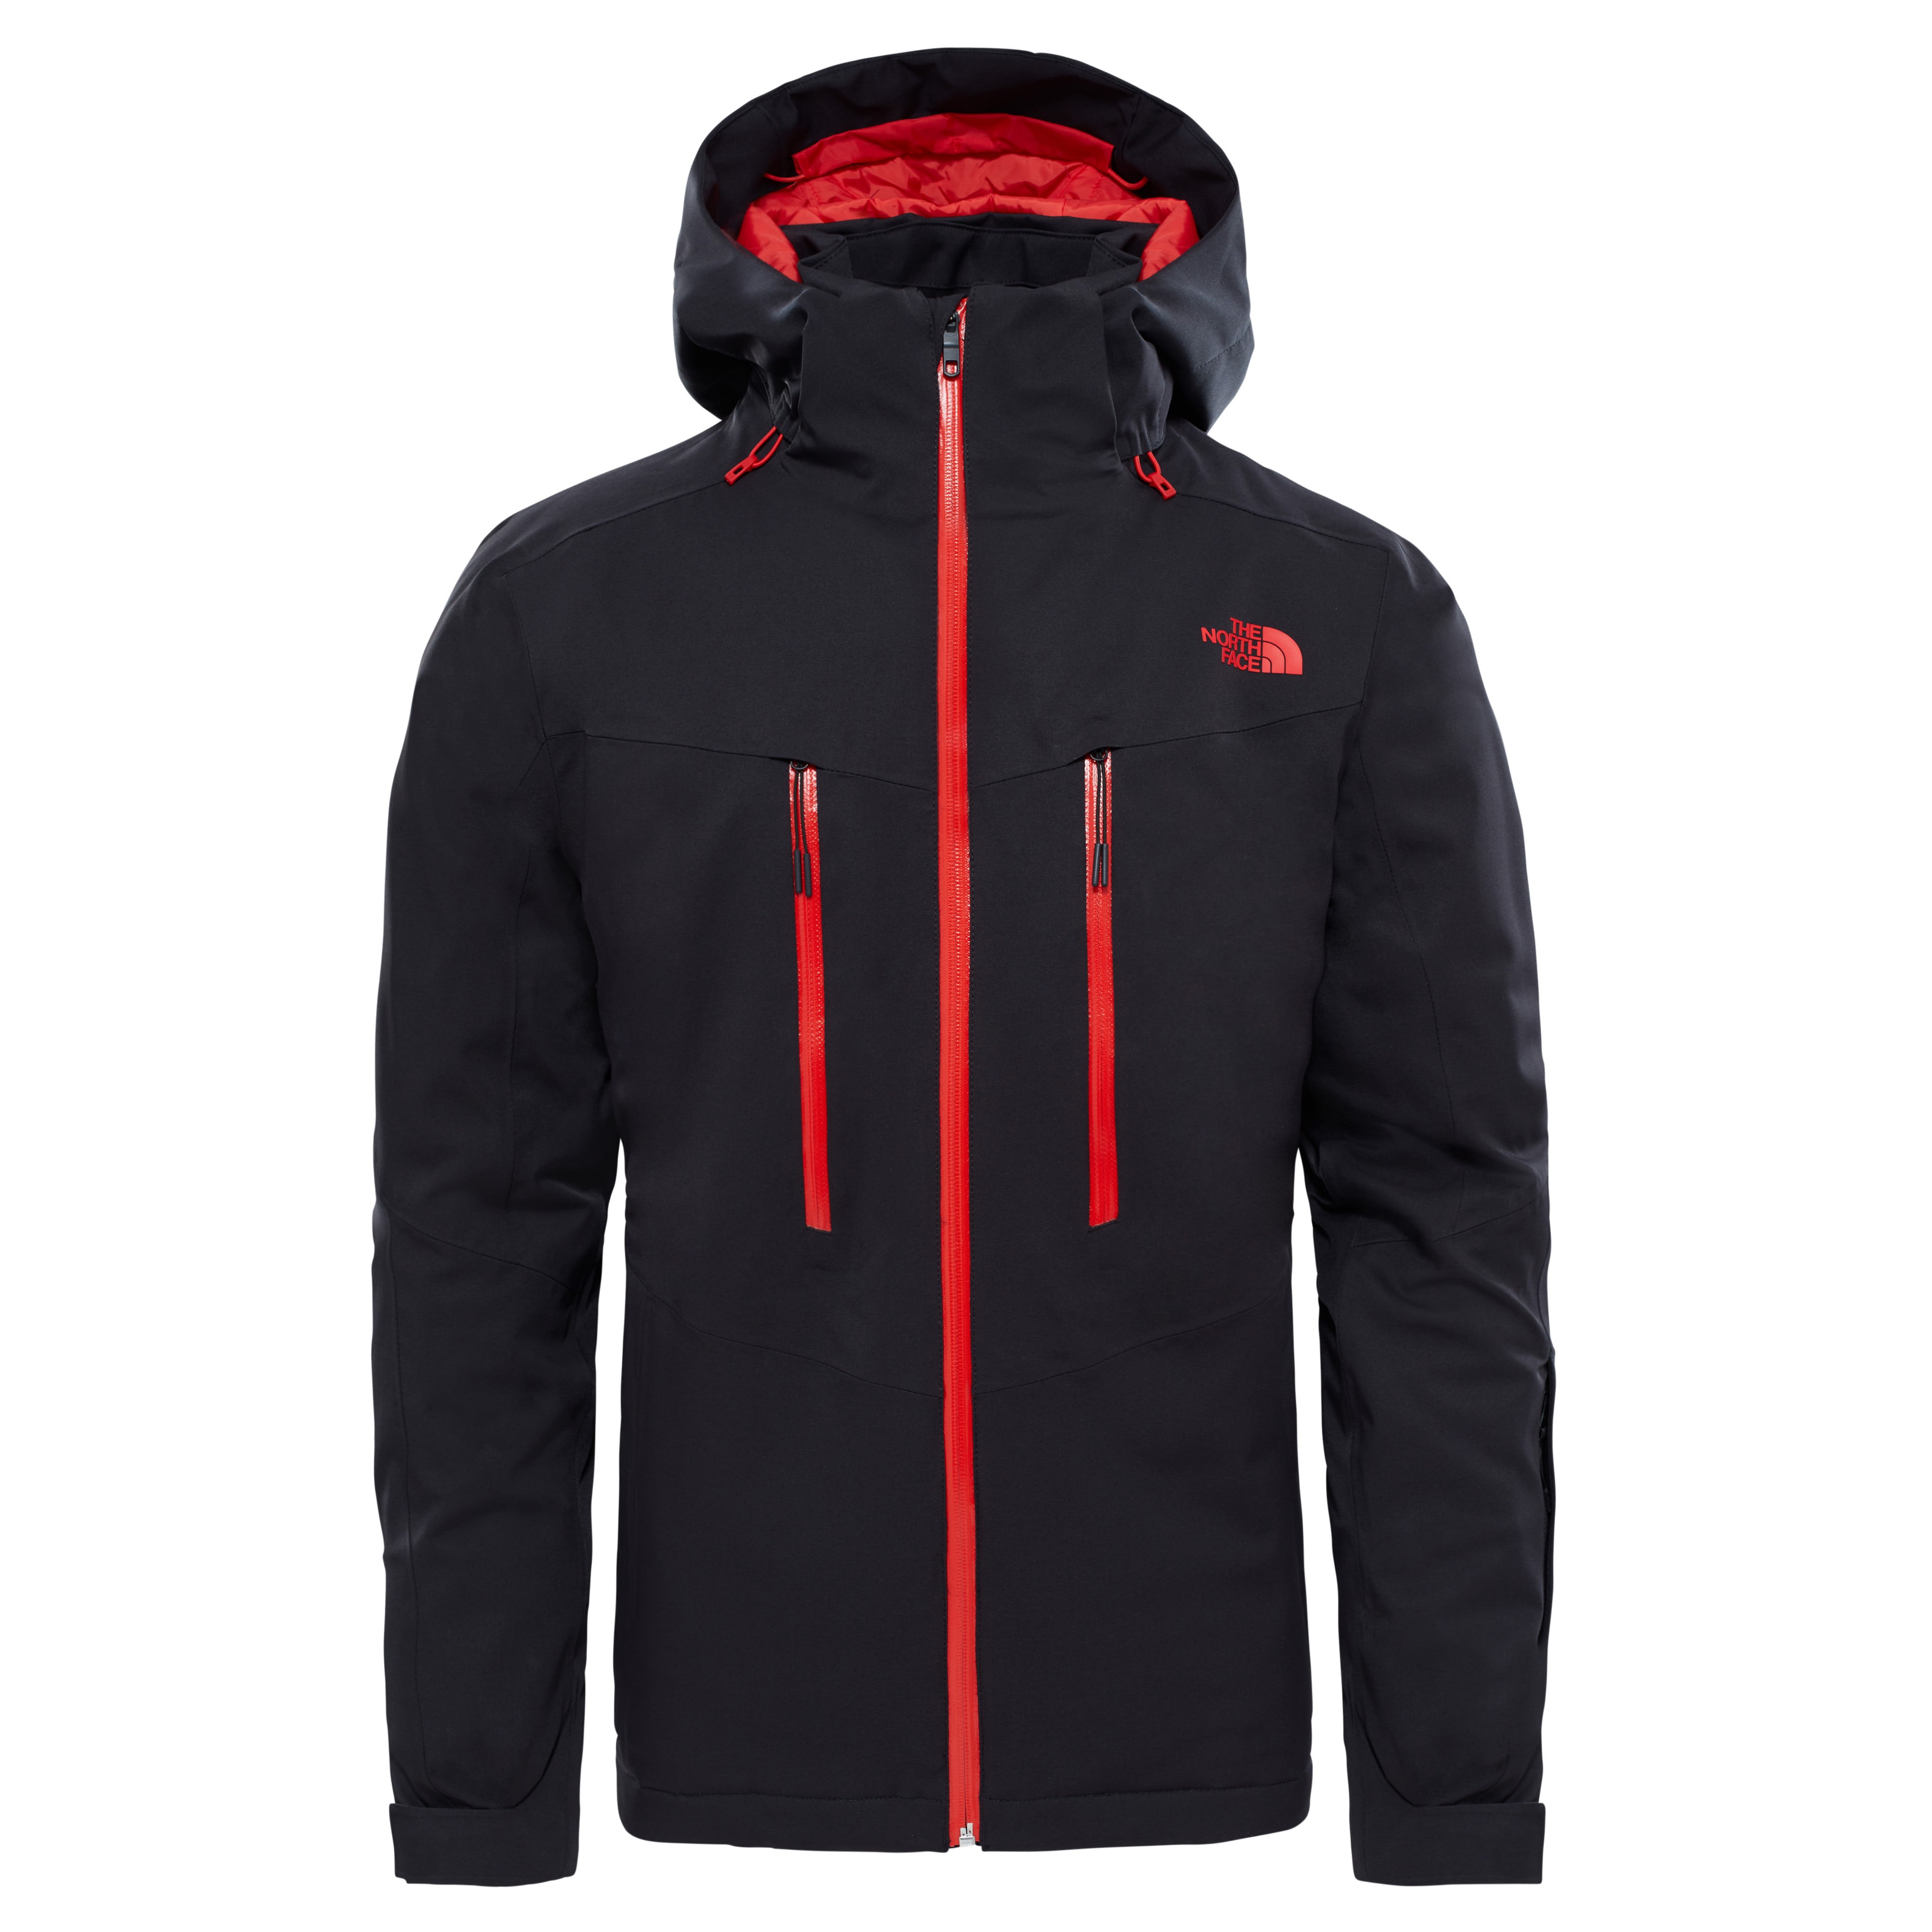 Buy The North Face M Chakal Jacket from 